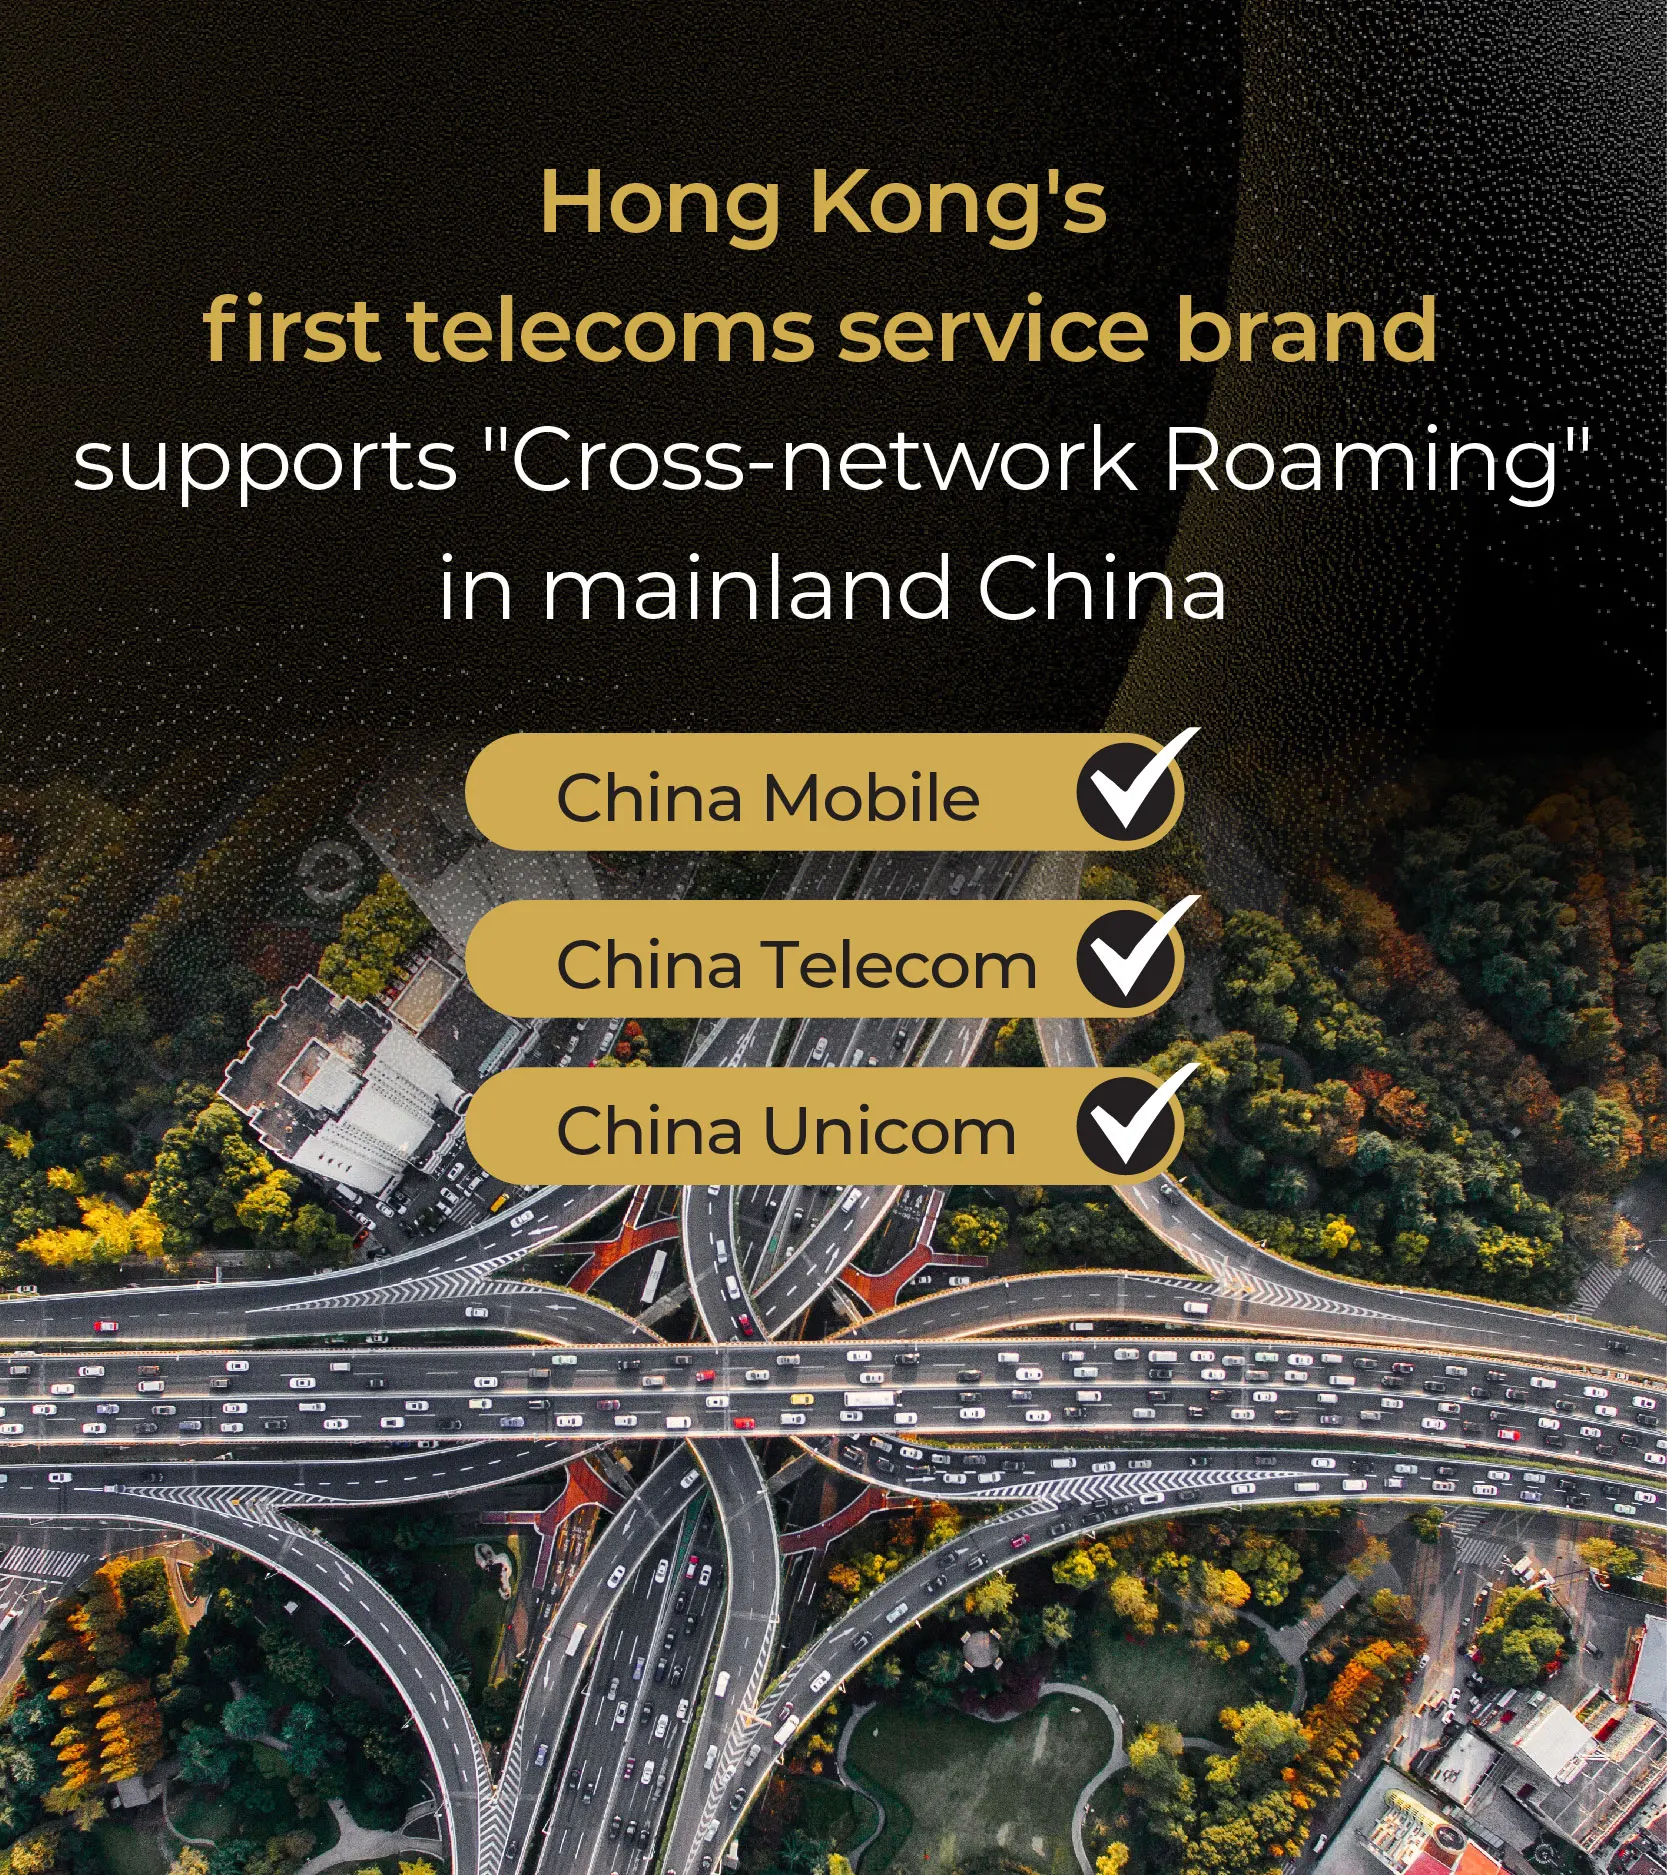 Hong Kong's first telecoms service brand supports cross-network roaming in Mainland China